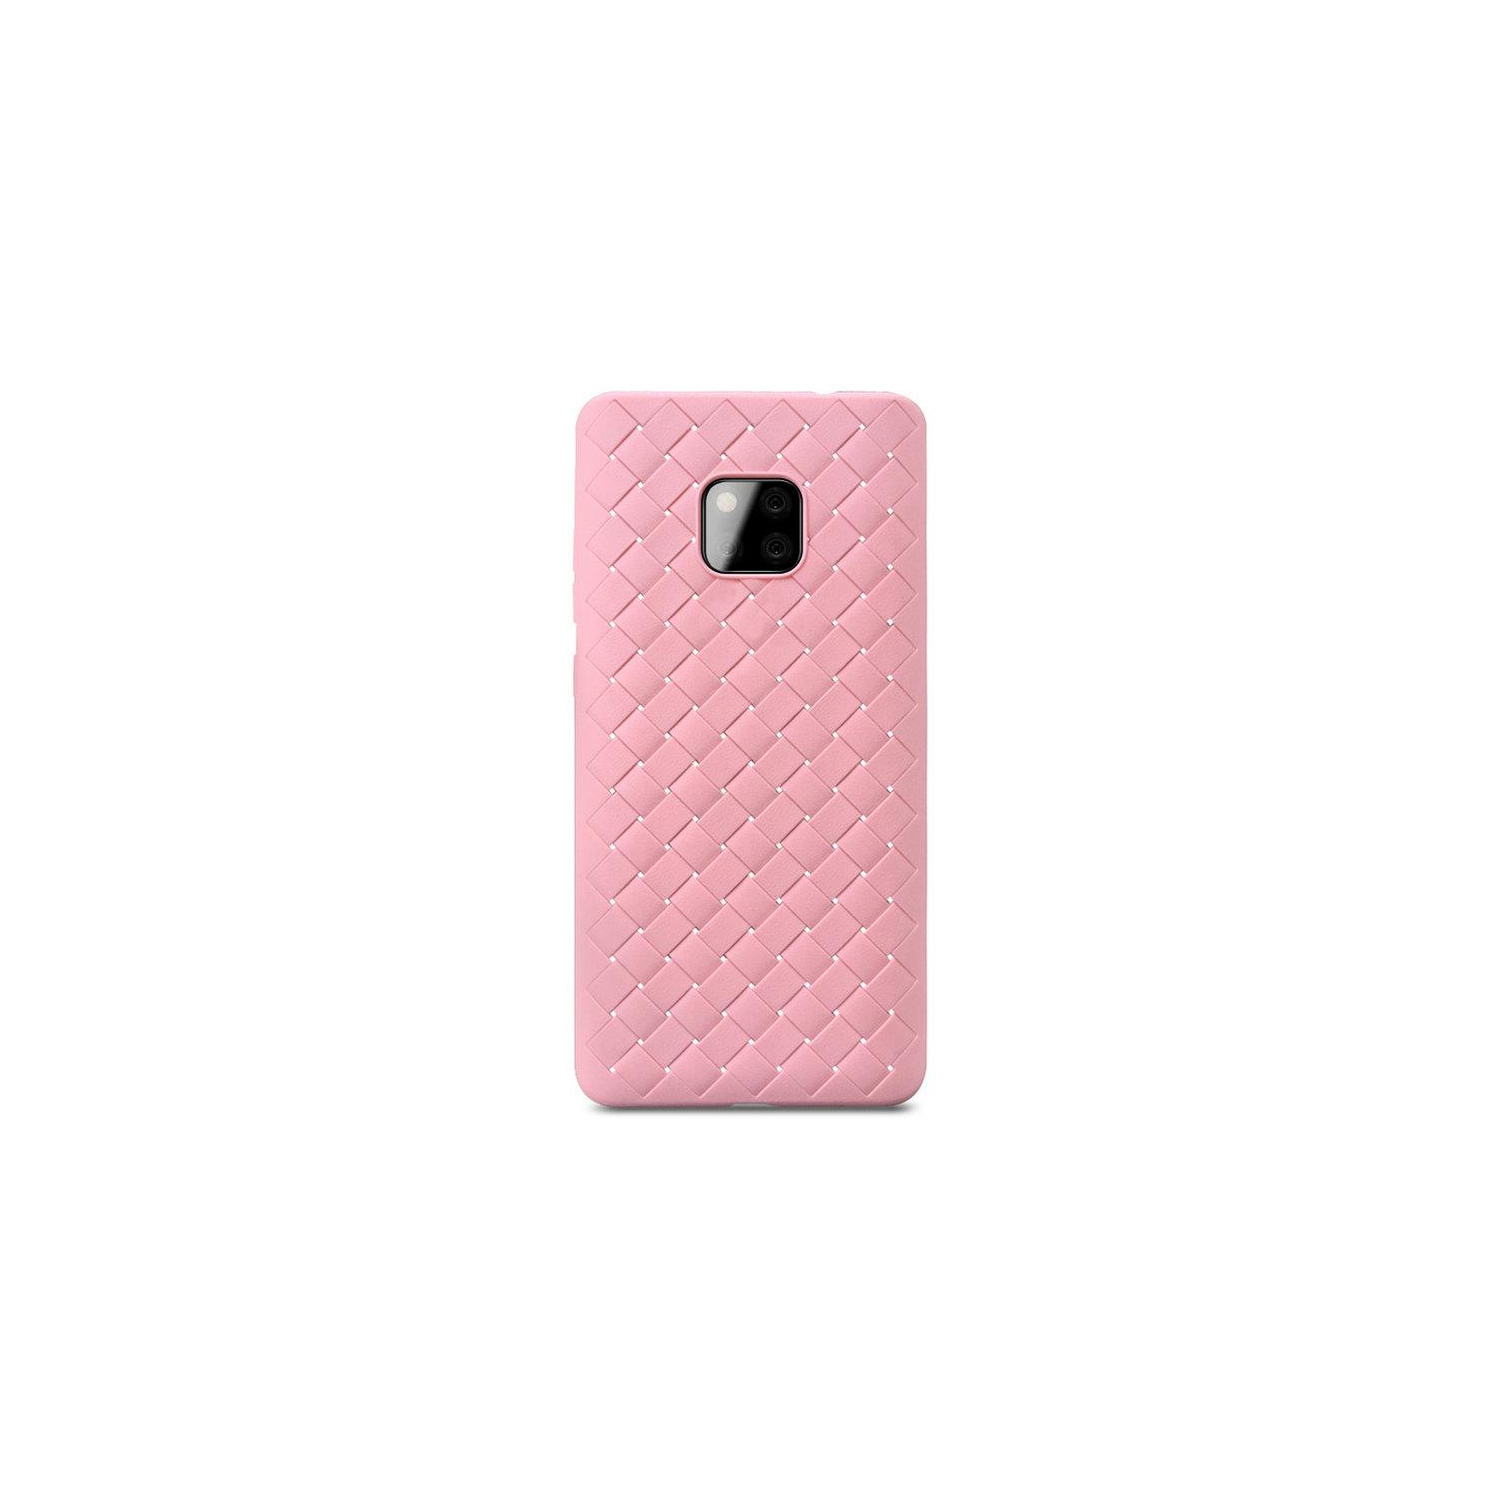 PANDACO Pink Leather Cross-Weave Case for Huawei Mate 20 Pro